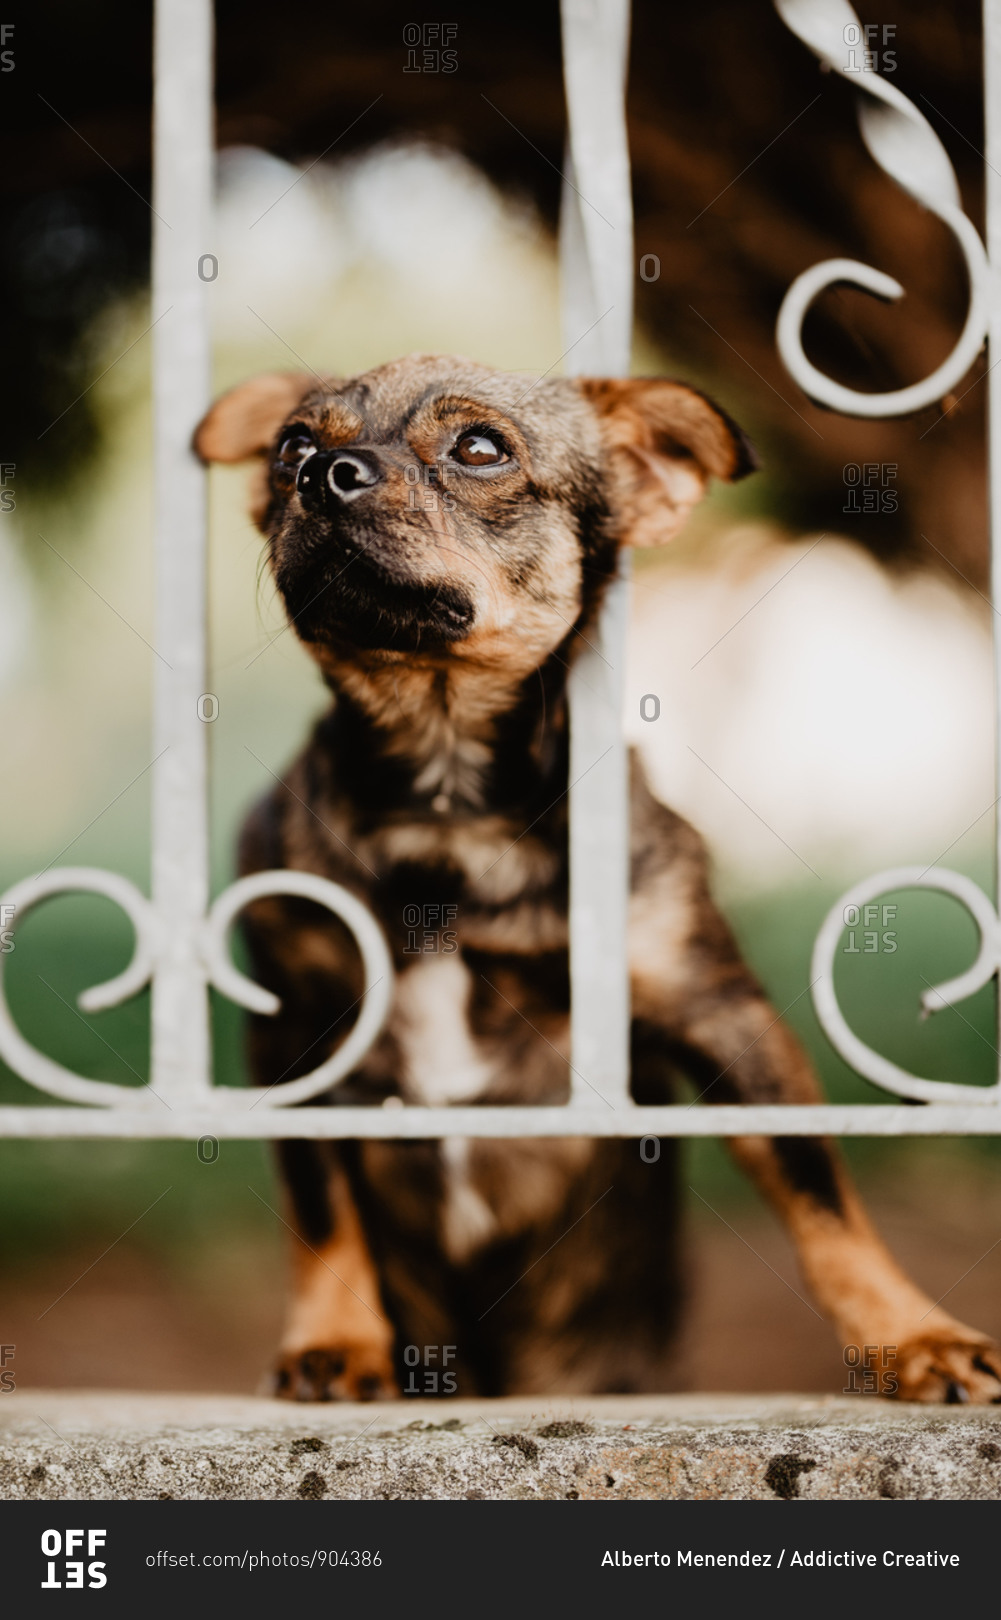 Cute curious little dog standing behind metal fence in yard and putting head between bars looking away